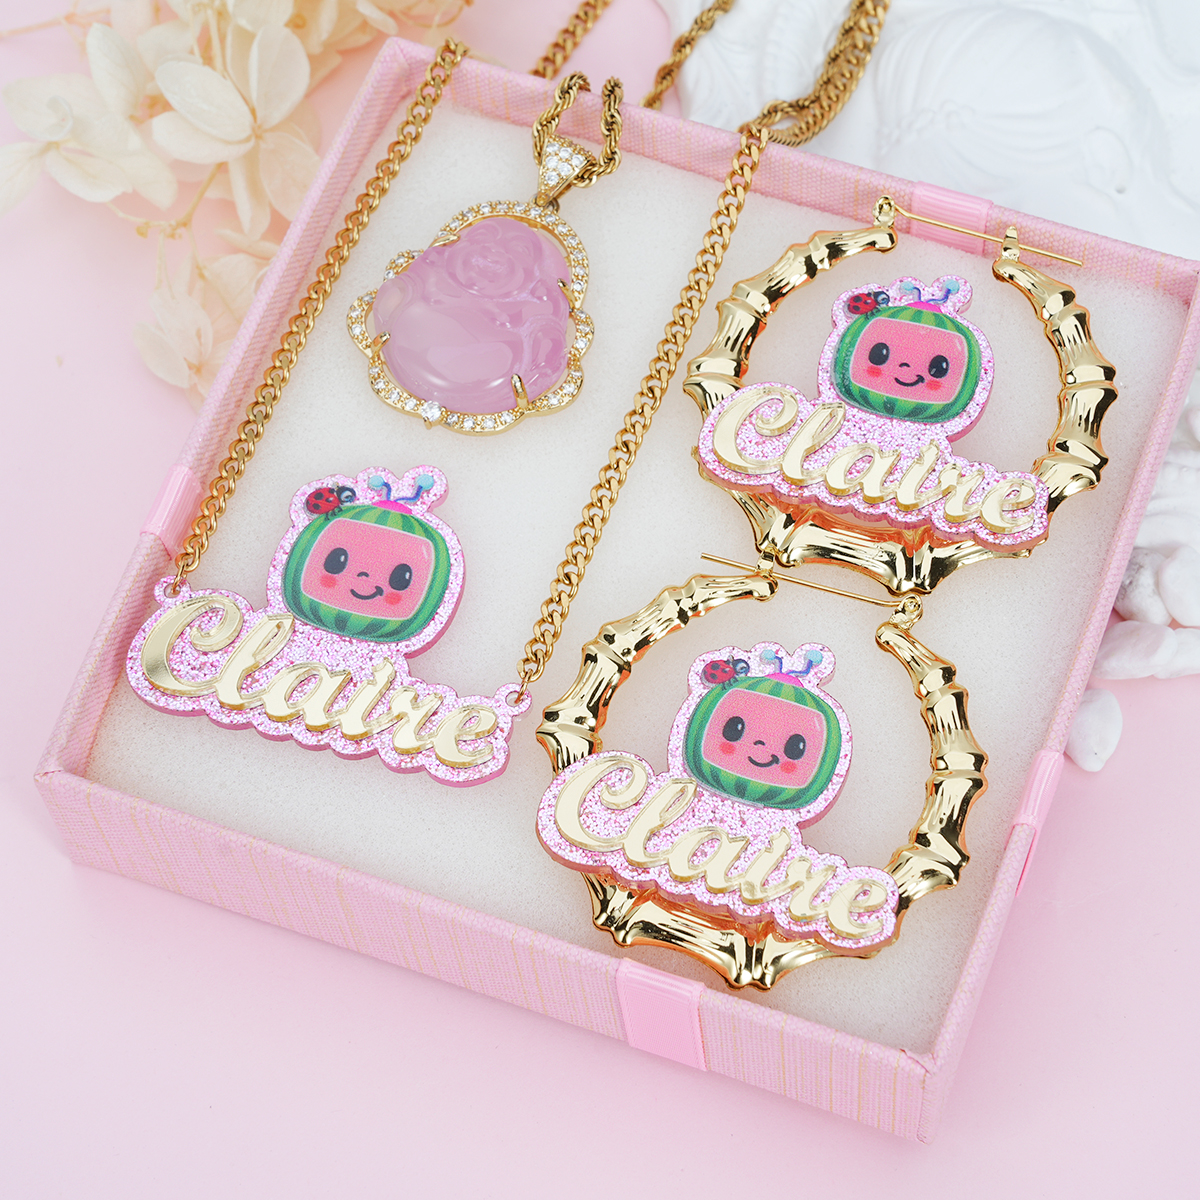 Acrylic Cute Watermelon Nameplate Personalized Jewelry Set 3pcs Buddha Necklace Name Necklace And Bambom Earring